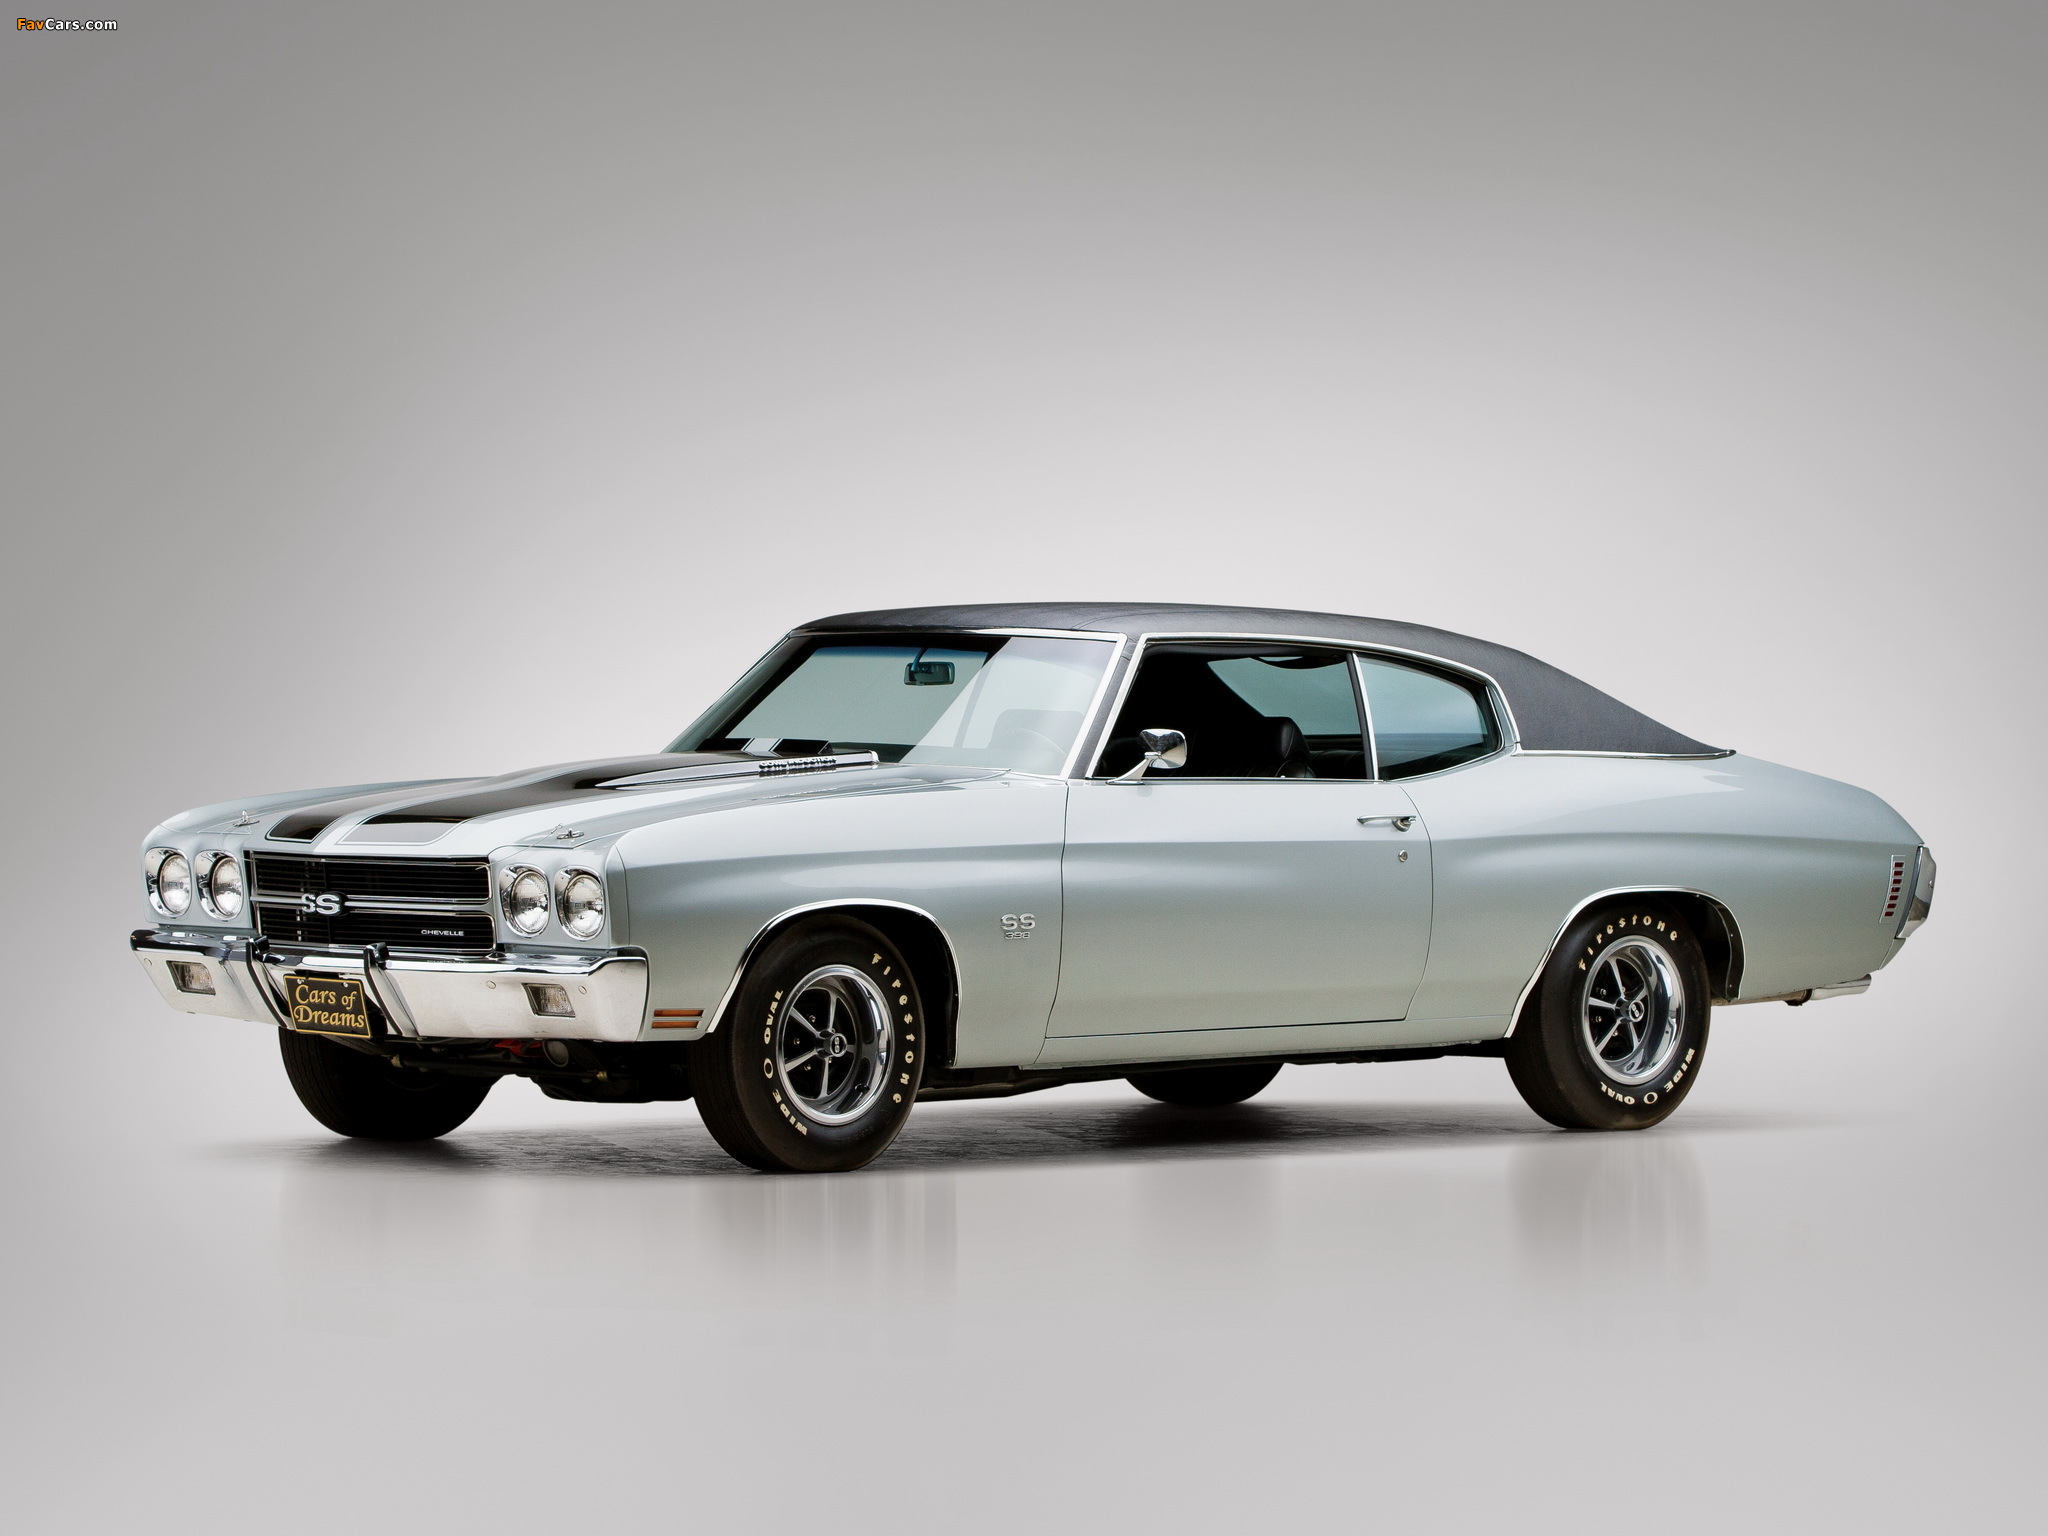 Wallpaper Of Chevrolet Chevelle Ss Hardtop Coupe